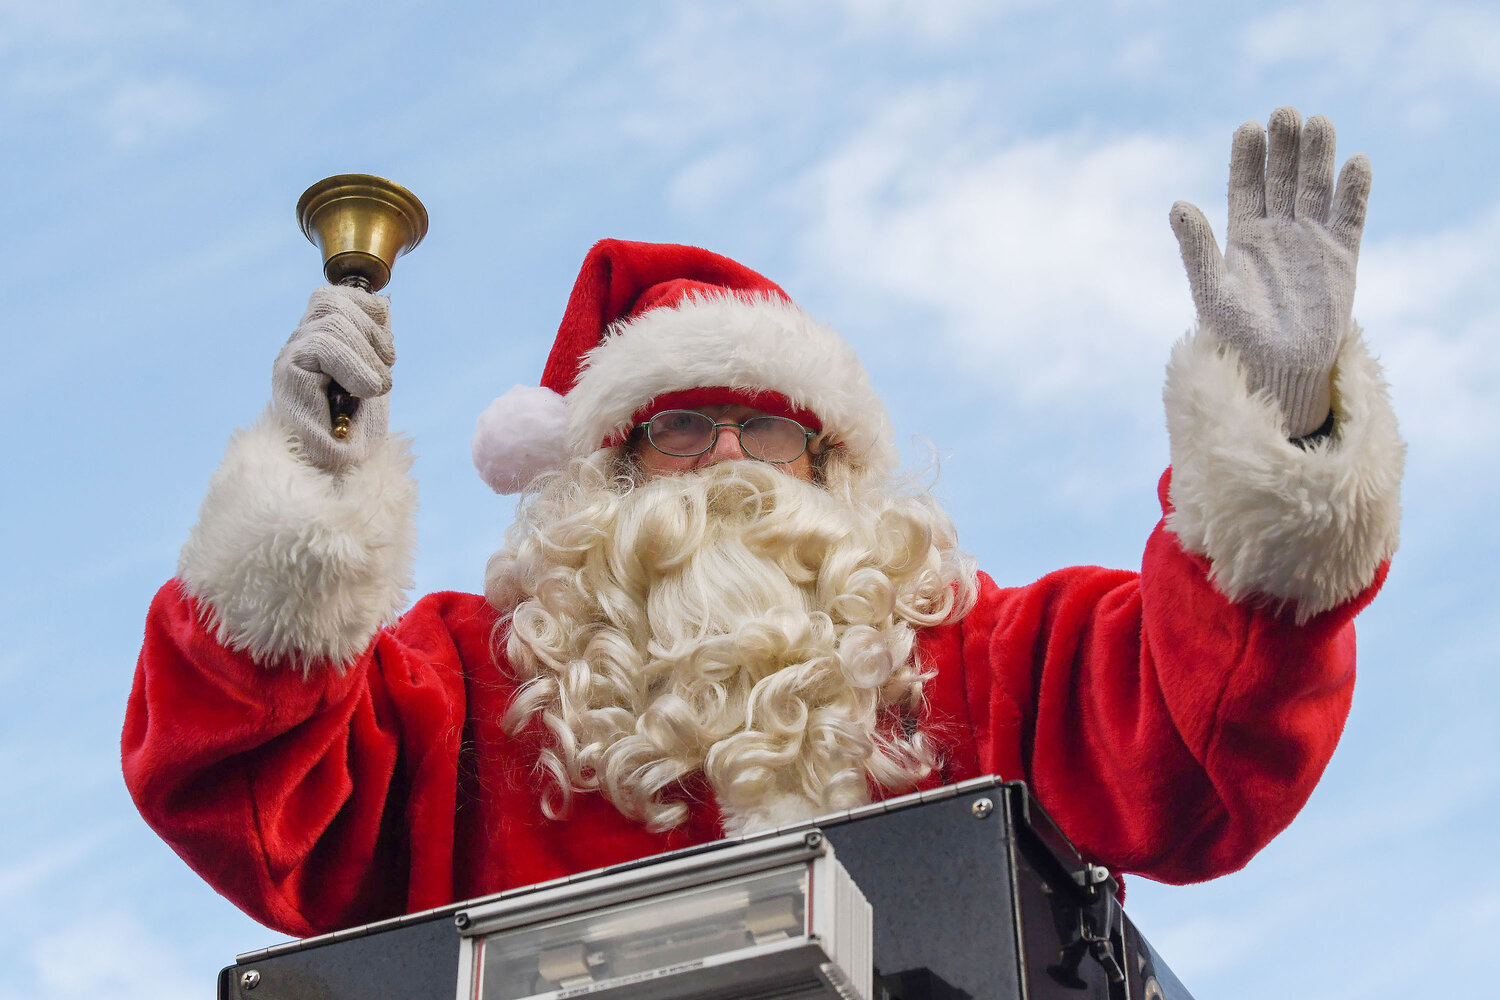 The Salisbury Christmas Parade begins Sunday at 1 p.m. with local bands, first-responders, elected officials and many more. As usual, Santa will close out the parade on East Main Street.